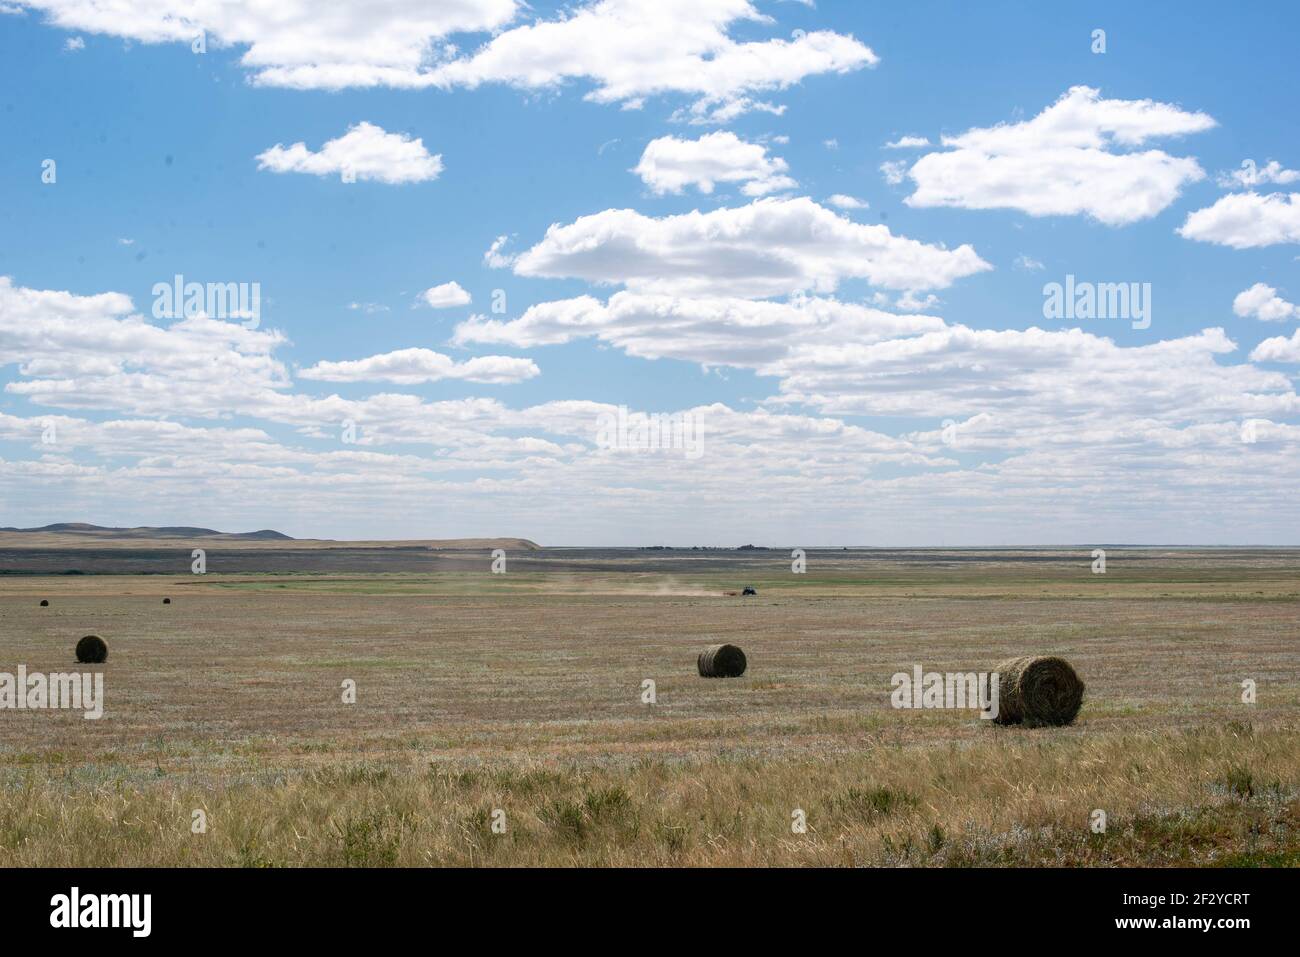 A herd of cattle grazing on a dry grass field Stock Photo